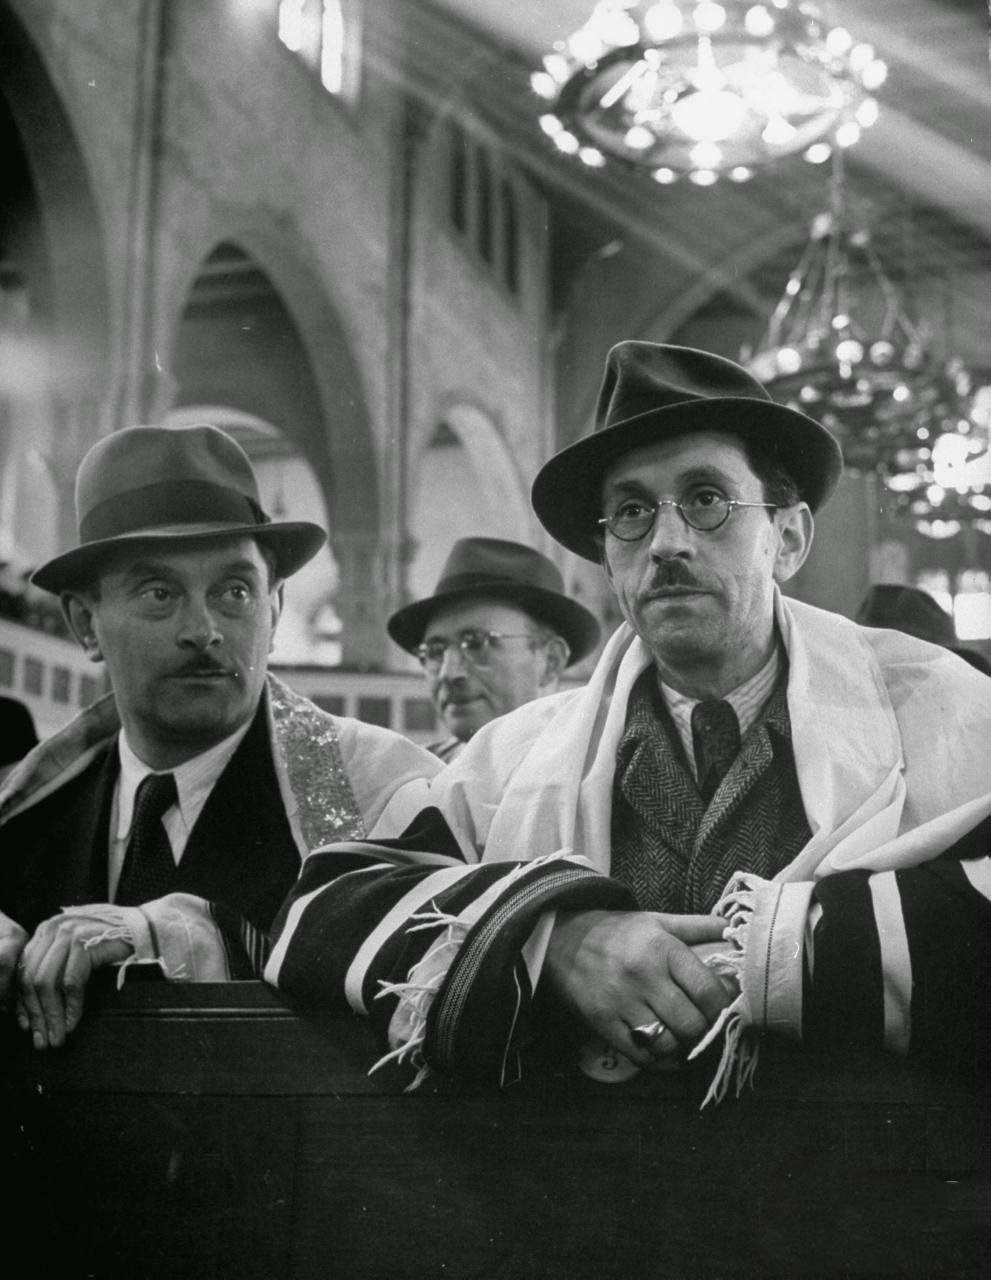 Jewish men attending the synagogue during Passover.